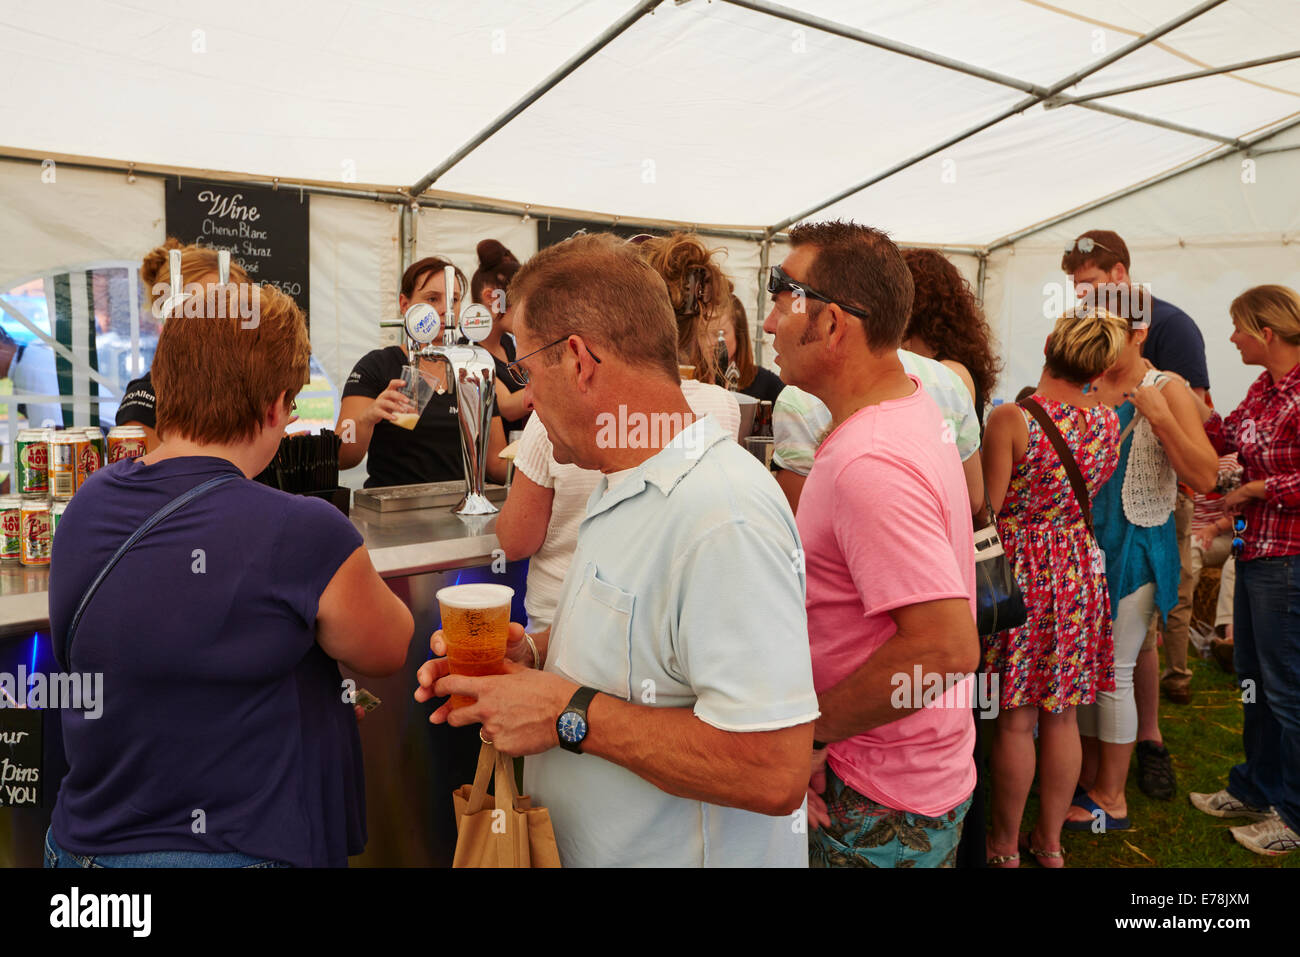 Inside The The Hog And Hop Pub Beer Tent At The Food And Drink Festival Leamington Spa Warwickshire UK Stock Photo